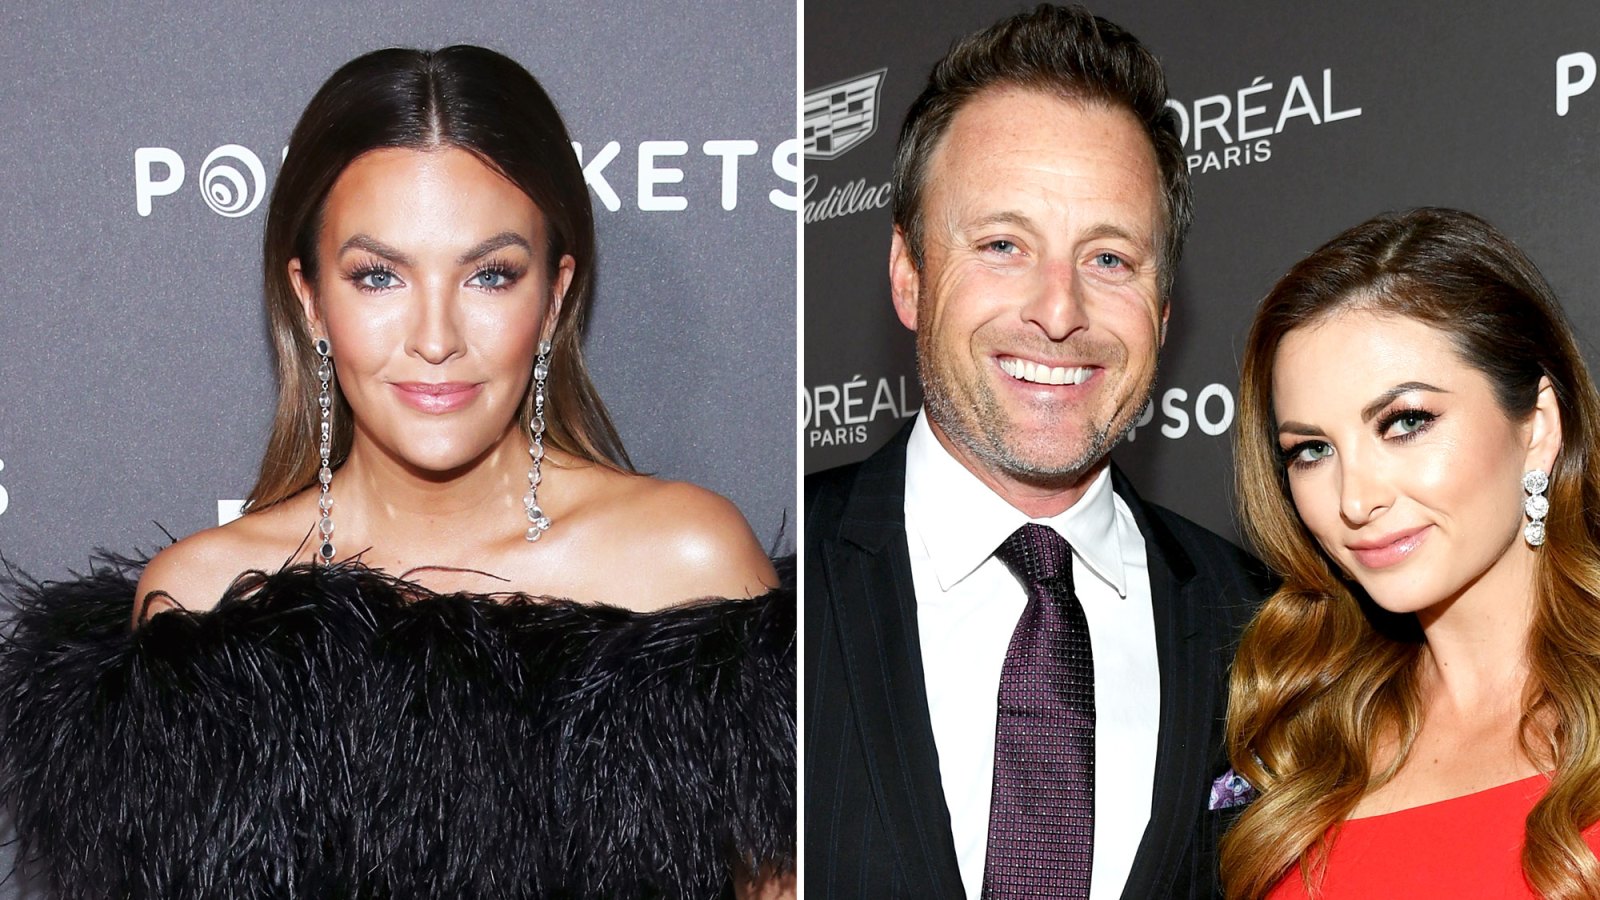 Chris Harrison’s Relationship With Lauren Zima Is ‘the Craziest Thing,’ Says Becca Tilley